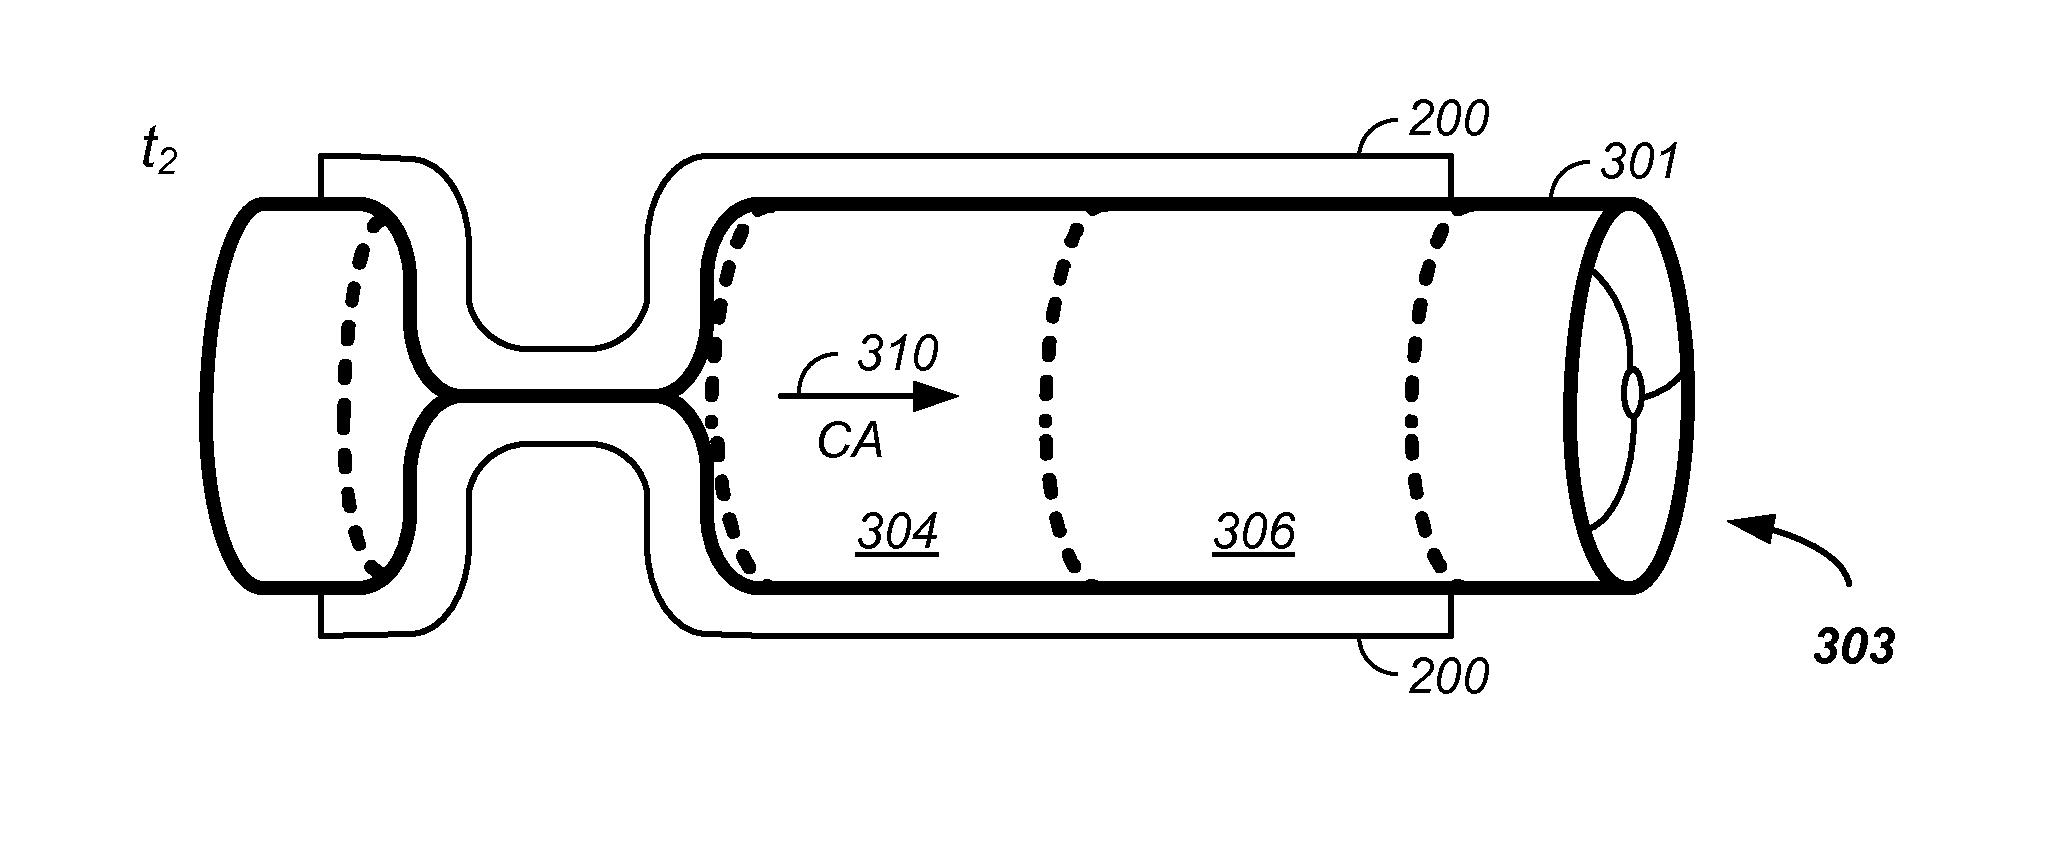 Heart assist apparatus and method of use thereof